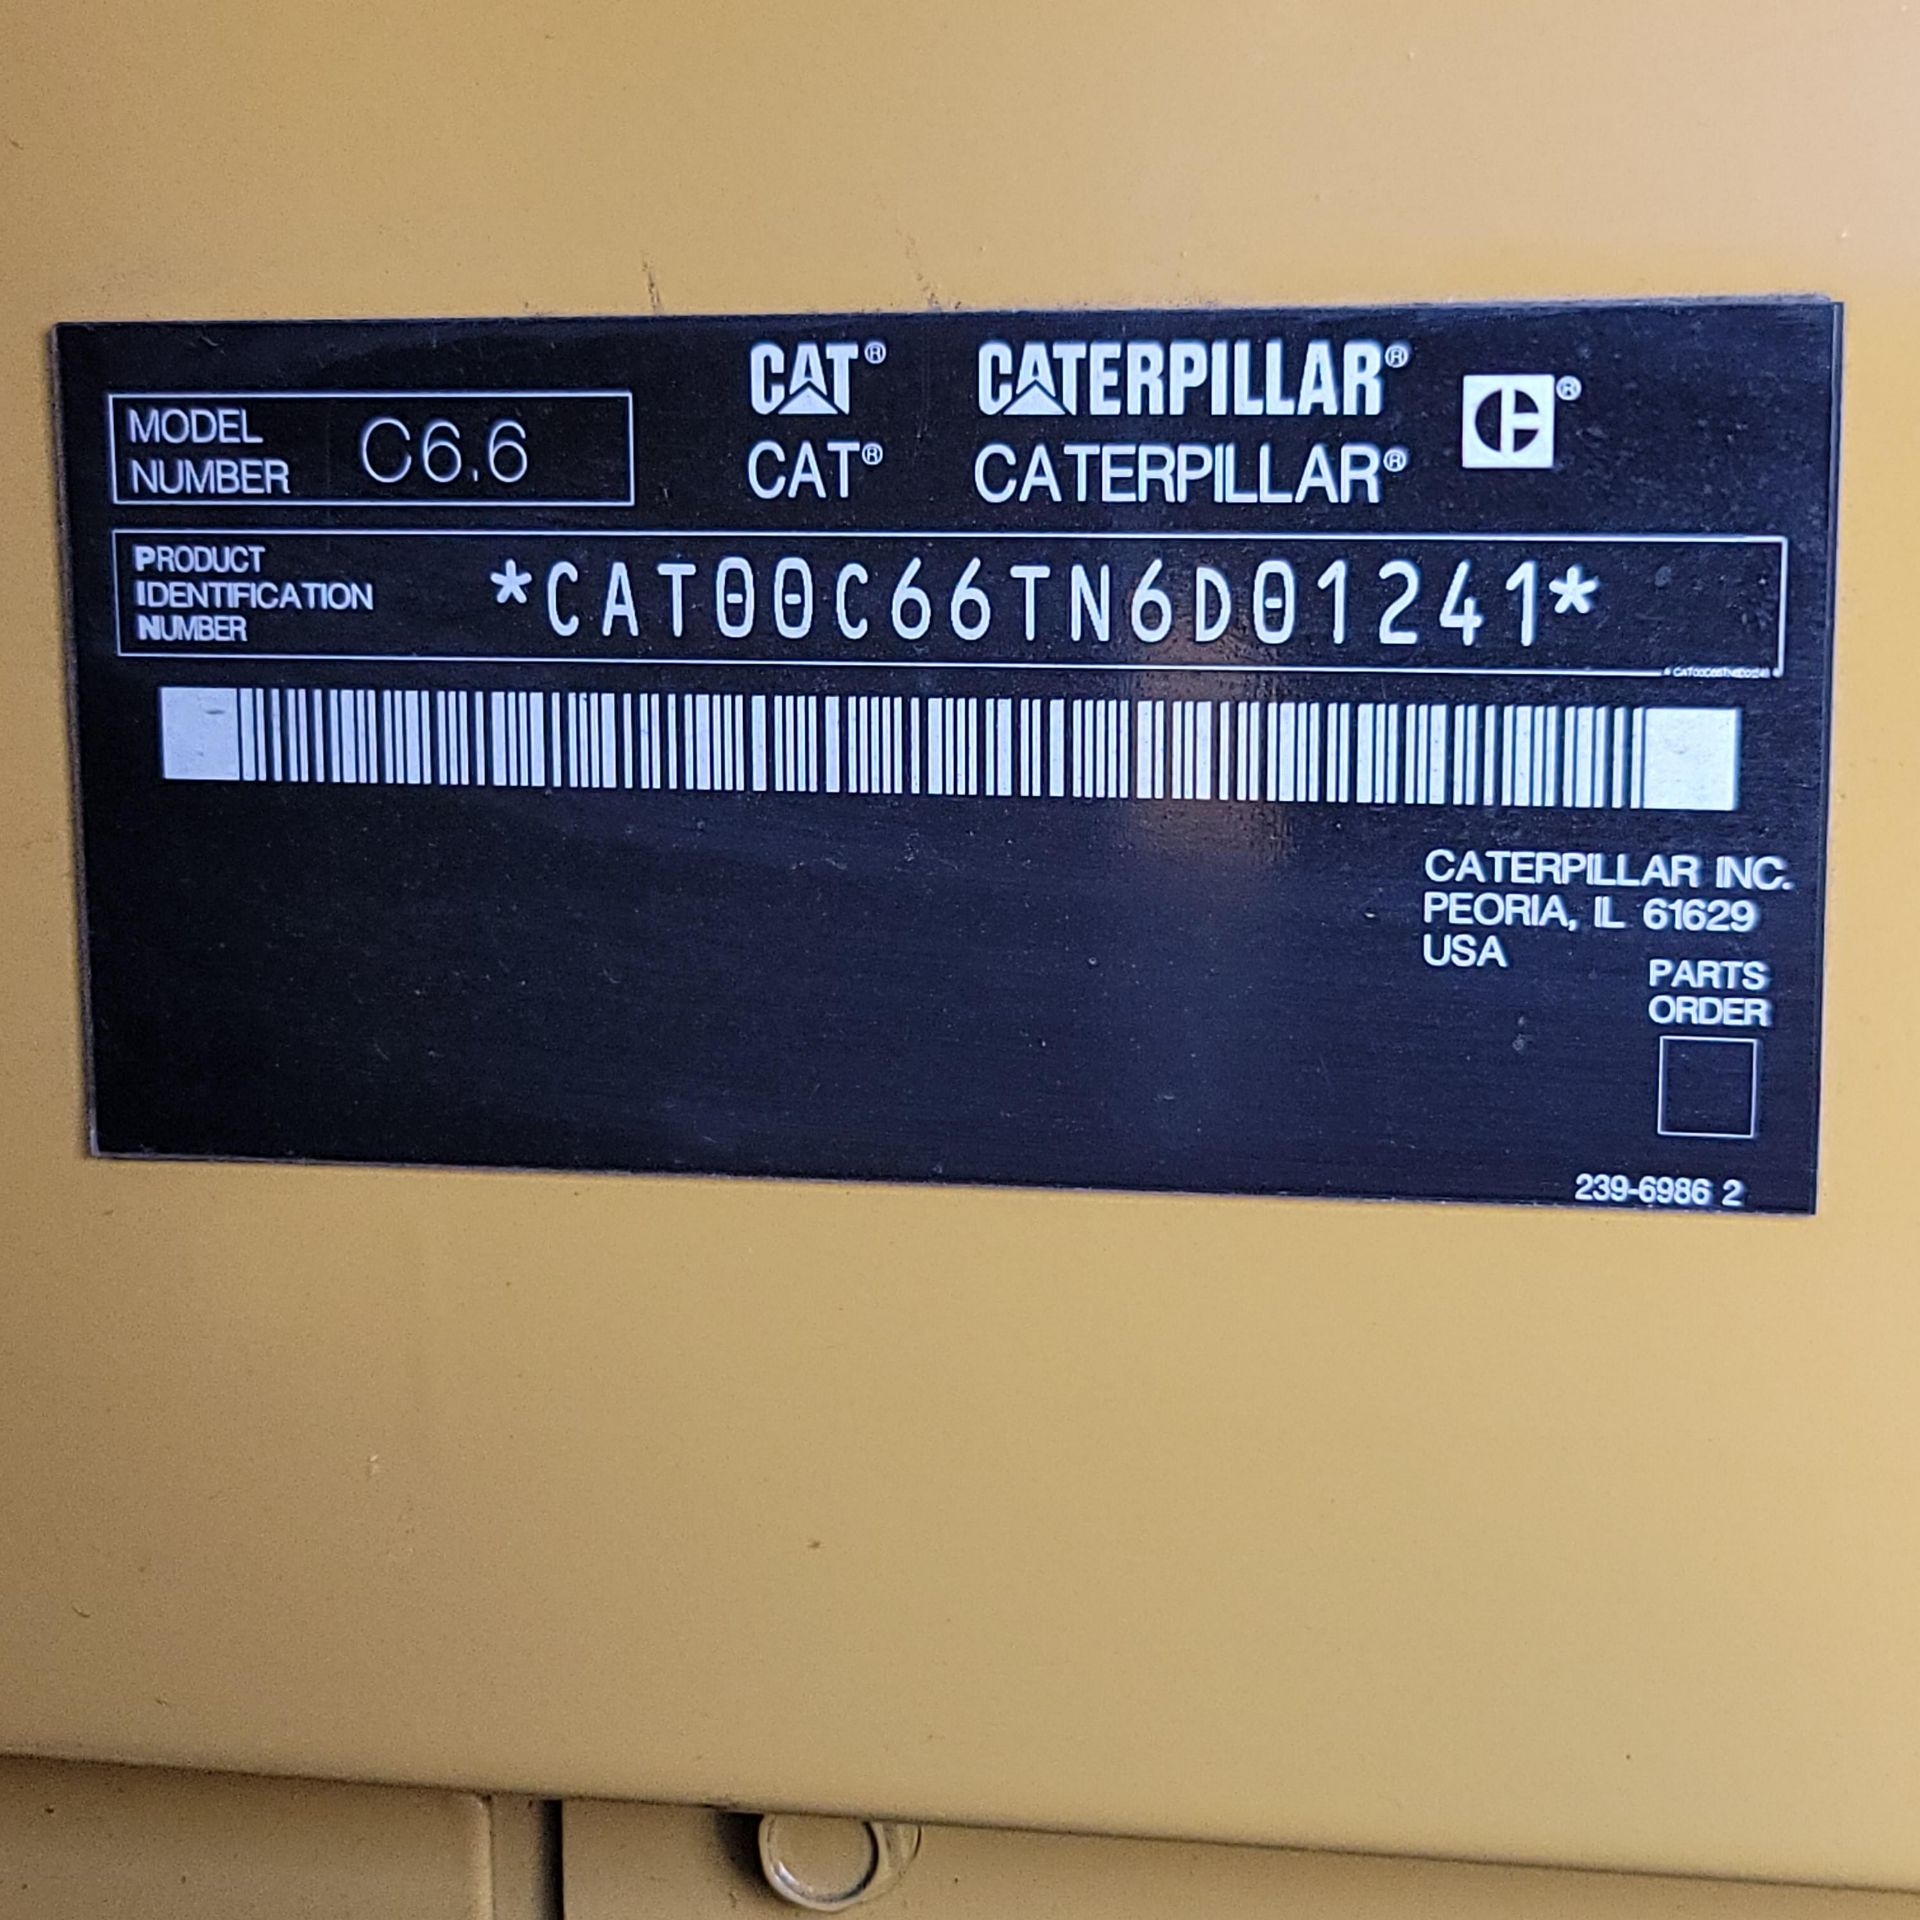 2009 CATERPILLAR STAND-BY GENERATOR, MODEL C6.6, (DELAYED PICKUP UNTIL MONDAY, APRIL 8) - Image 11 of 51